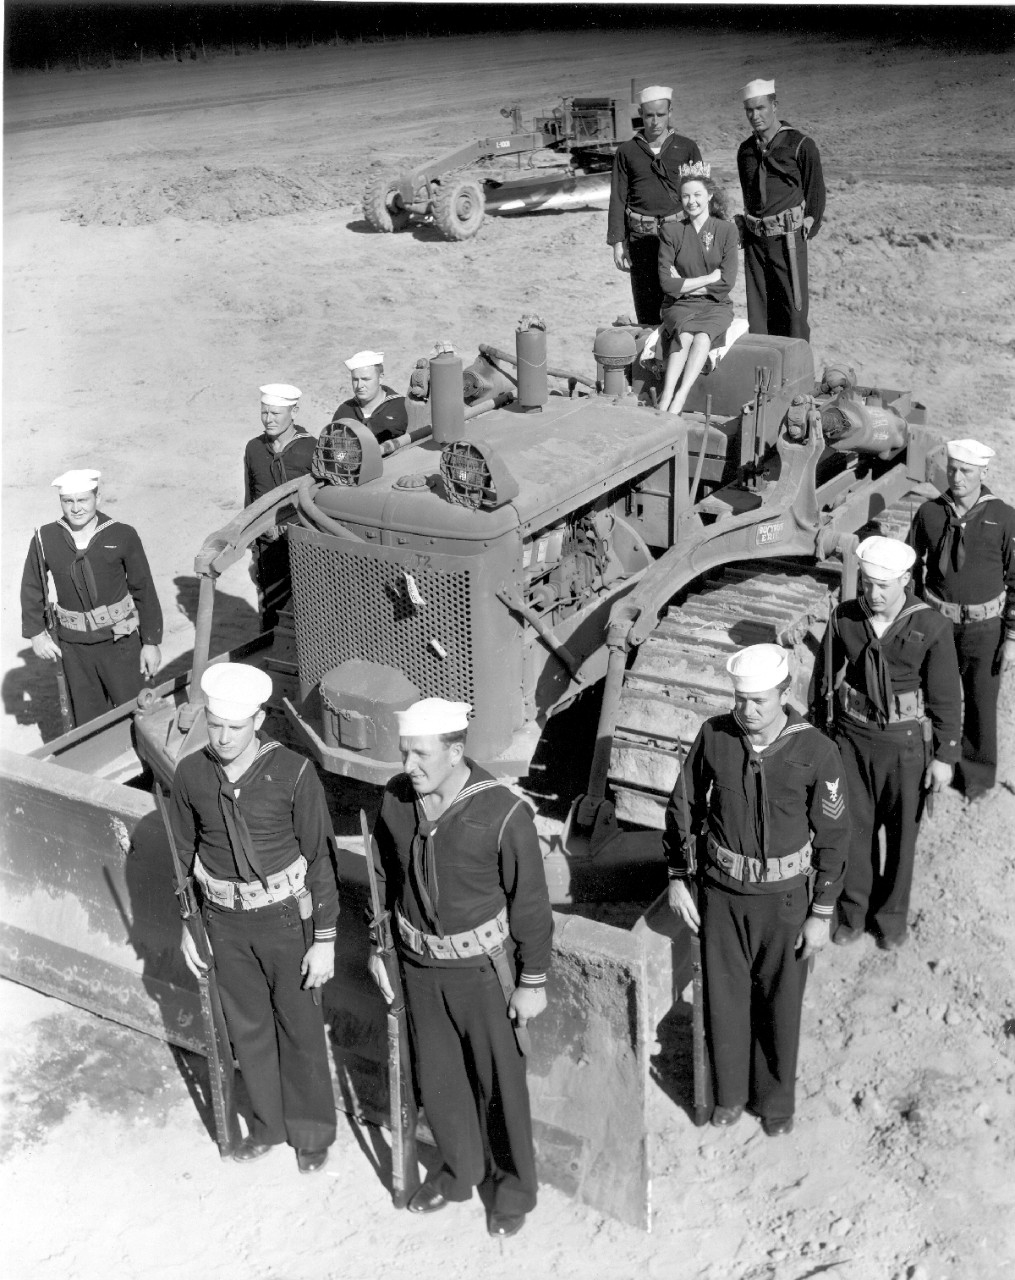 <p>Susan Hayward perched on top of her throne – a symbolic Seabee bulldozer - is crowned the first Seabee Queen by the enlisted men of CBMU 515, November 1943. The first “Queen of the Seabees” was officially welcomed to Camp Rousseau by Capt. H.P. Needham, CEC, USN, and crowned by F1c Clarence Wofford and MM2c William Murray.</p>
